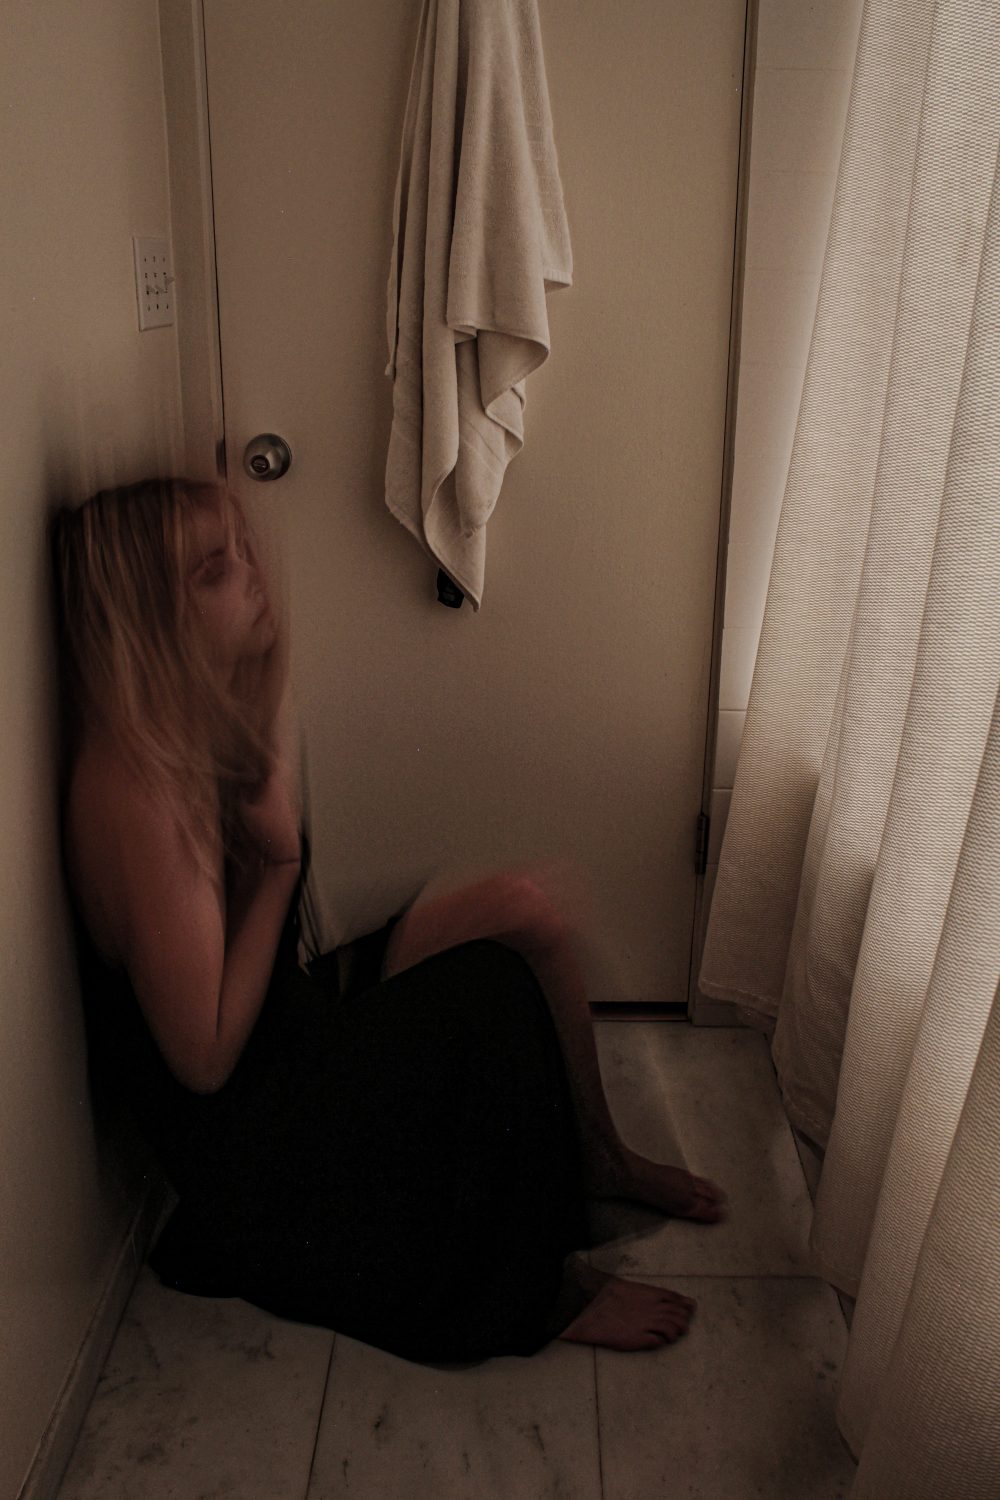 A photograph capturing the movement of a woman in distress standing in a bathroom near the door in a long, black prom dress, sliding her back down the white bathroom wall to sit on the white marble floor.